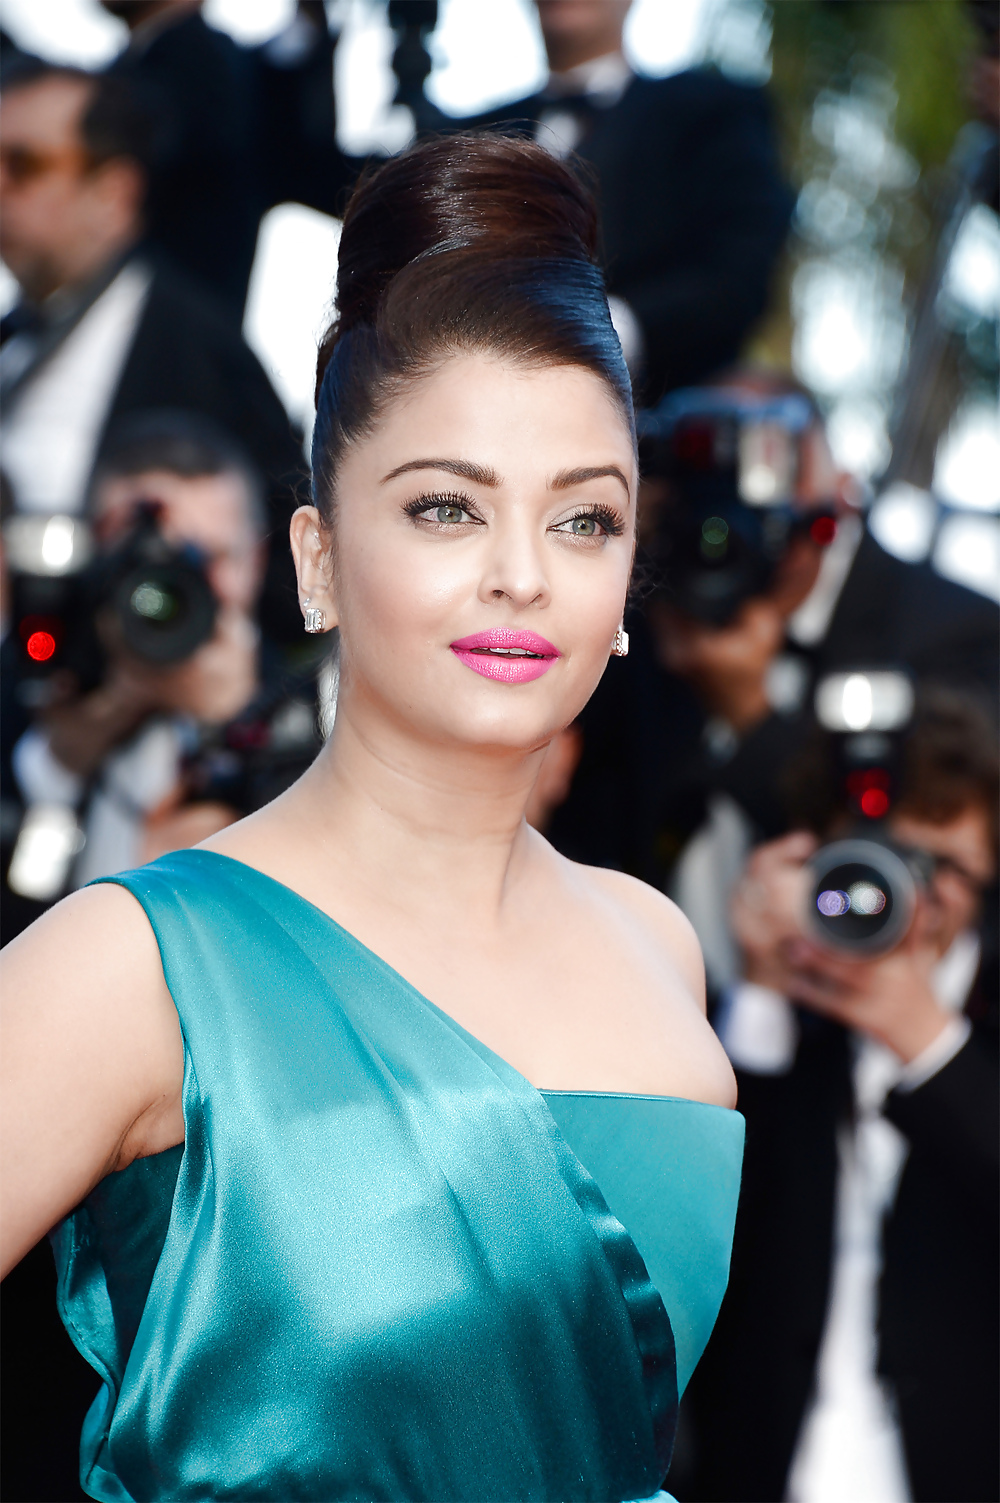 Aish at her Best- Comments are welcome #18498818